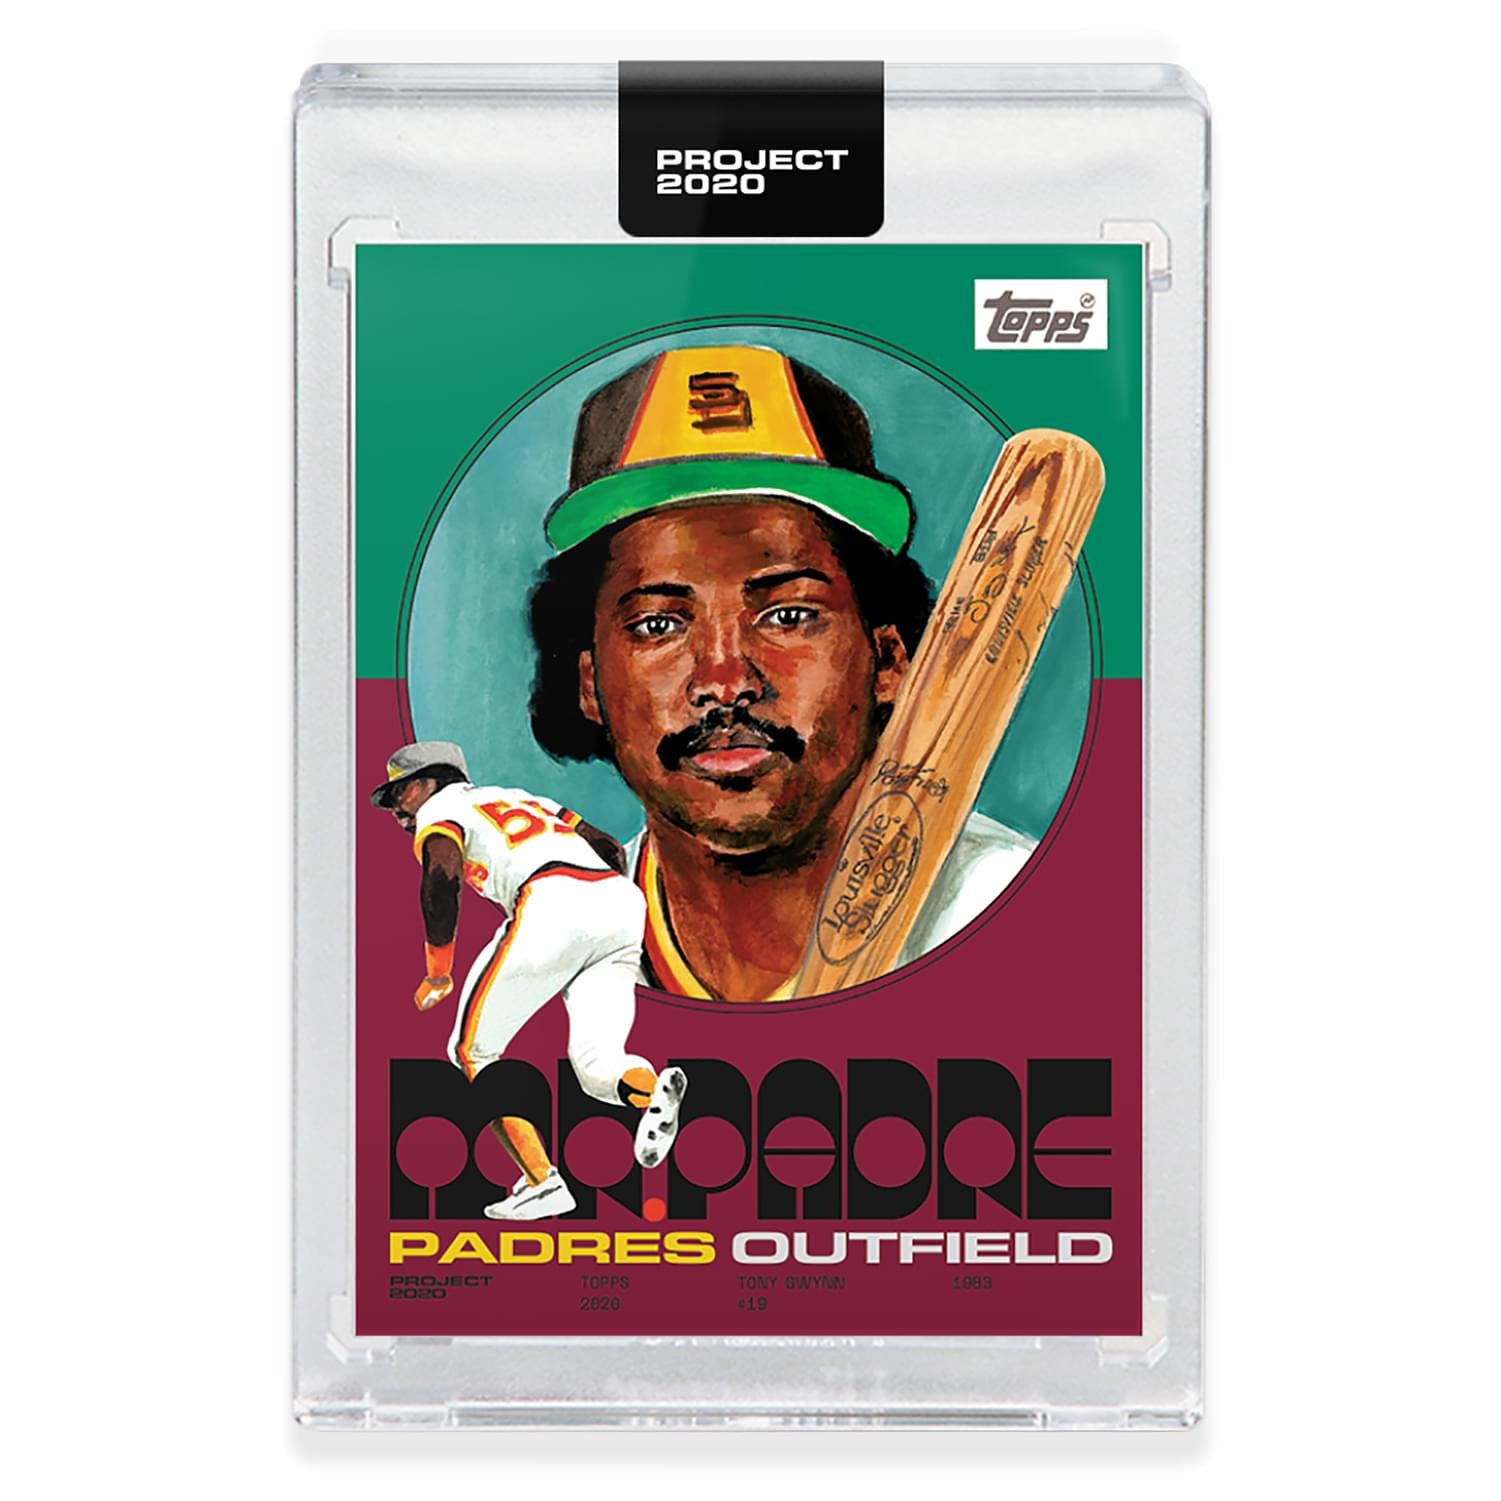 Topps PROJECT 2020 Card 237 - 1983 Tony Gwynn by Jacob Rochester